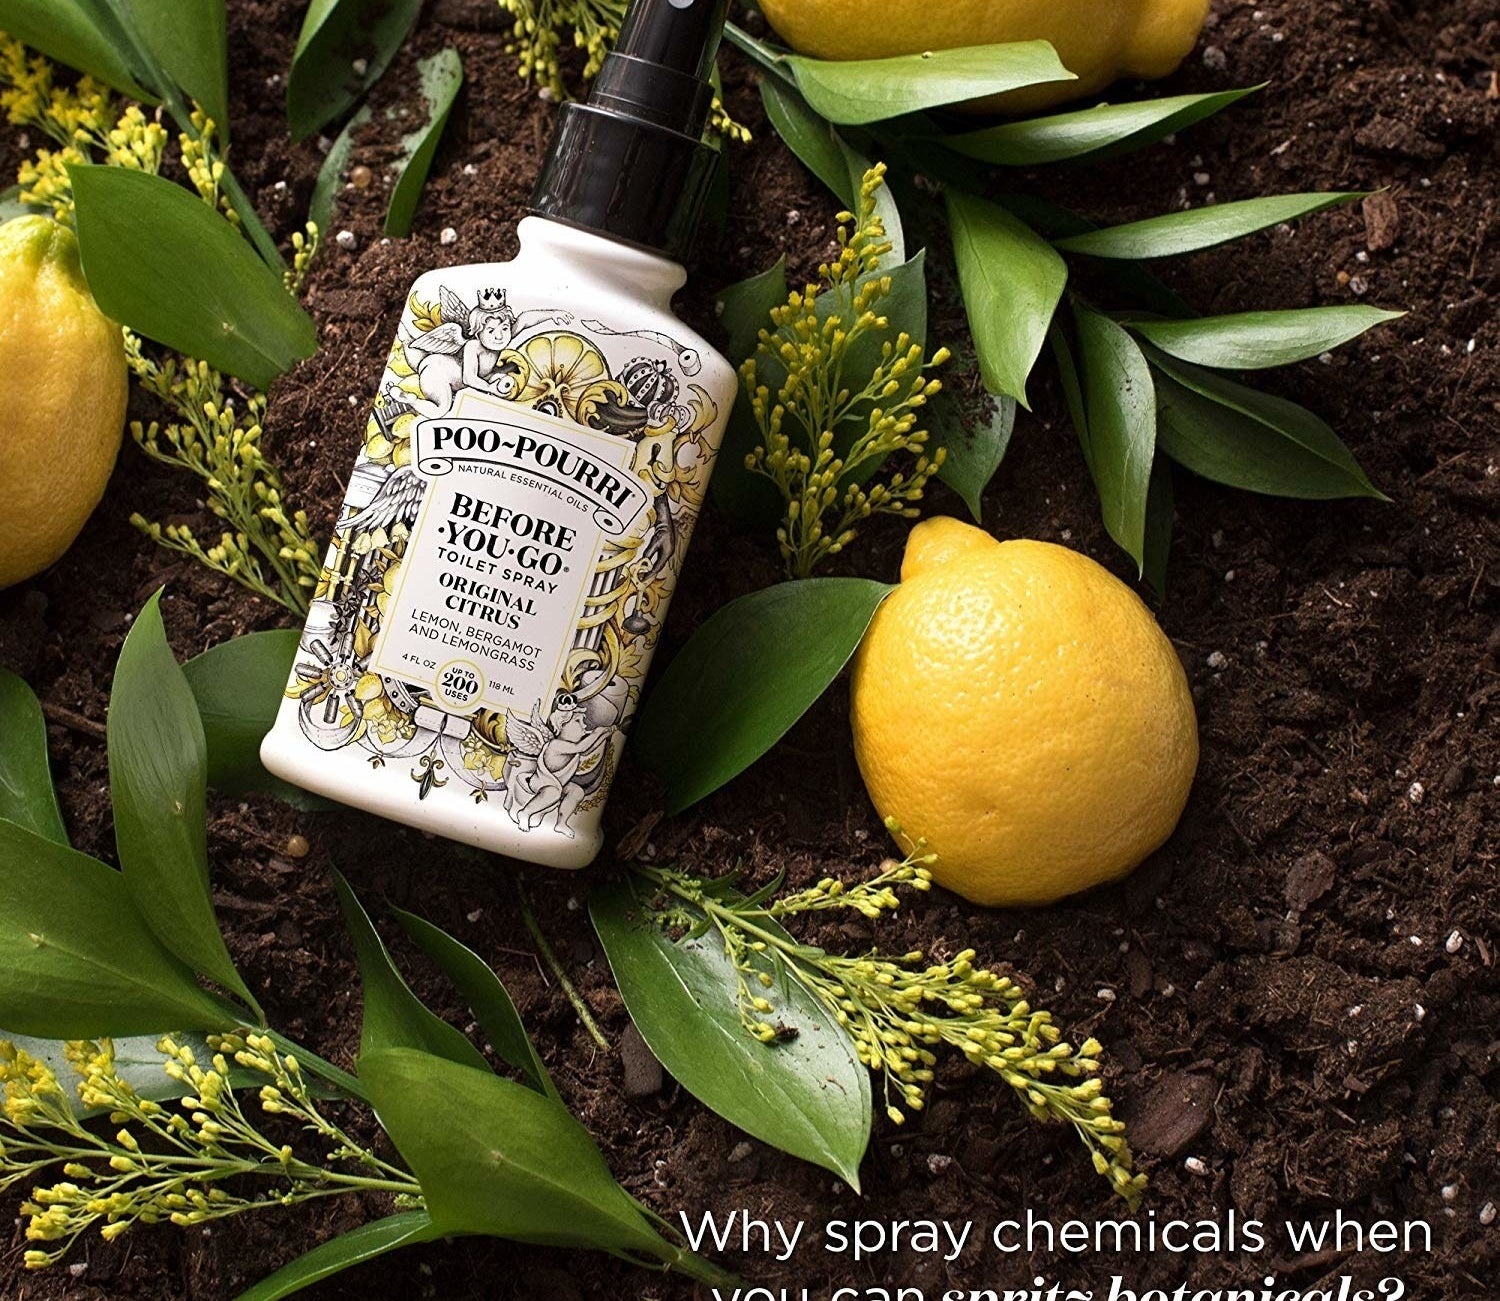 A bottle of the original citrus-scented spray styled with lemons and lemon branches